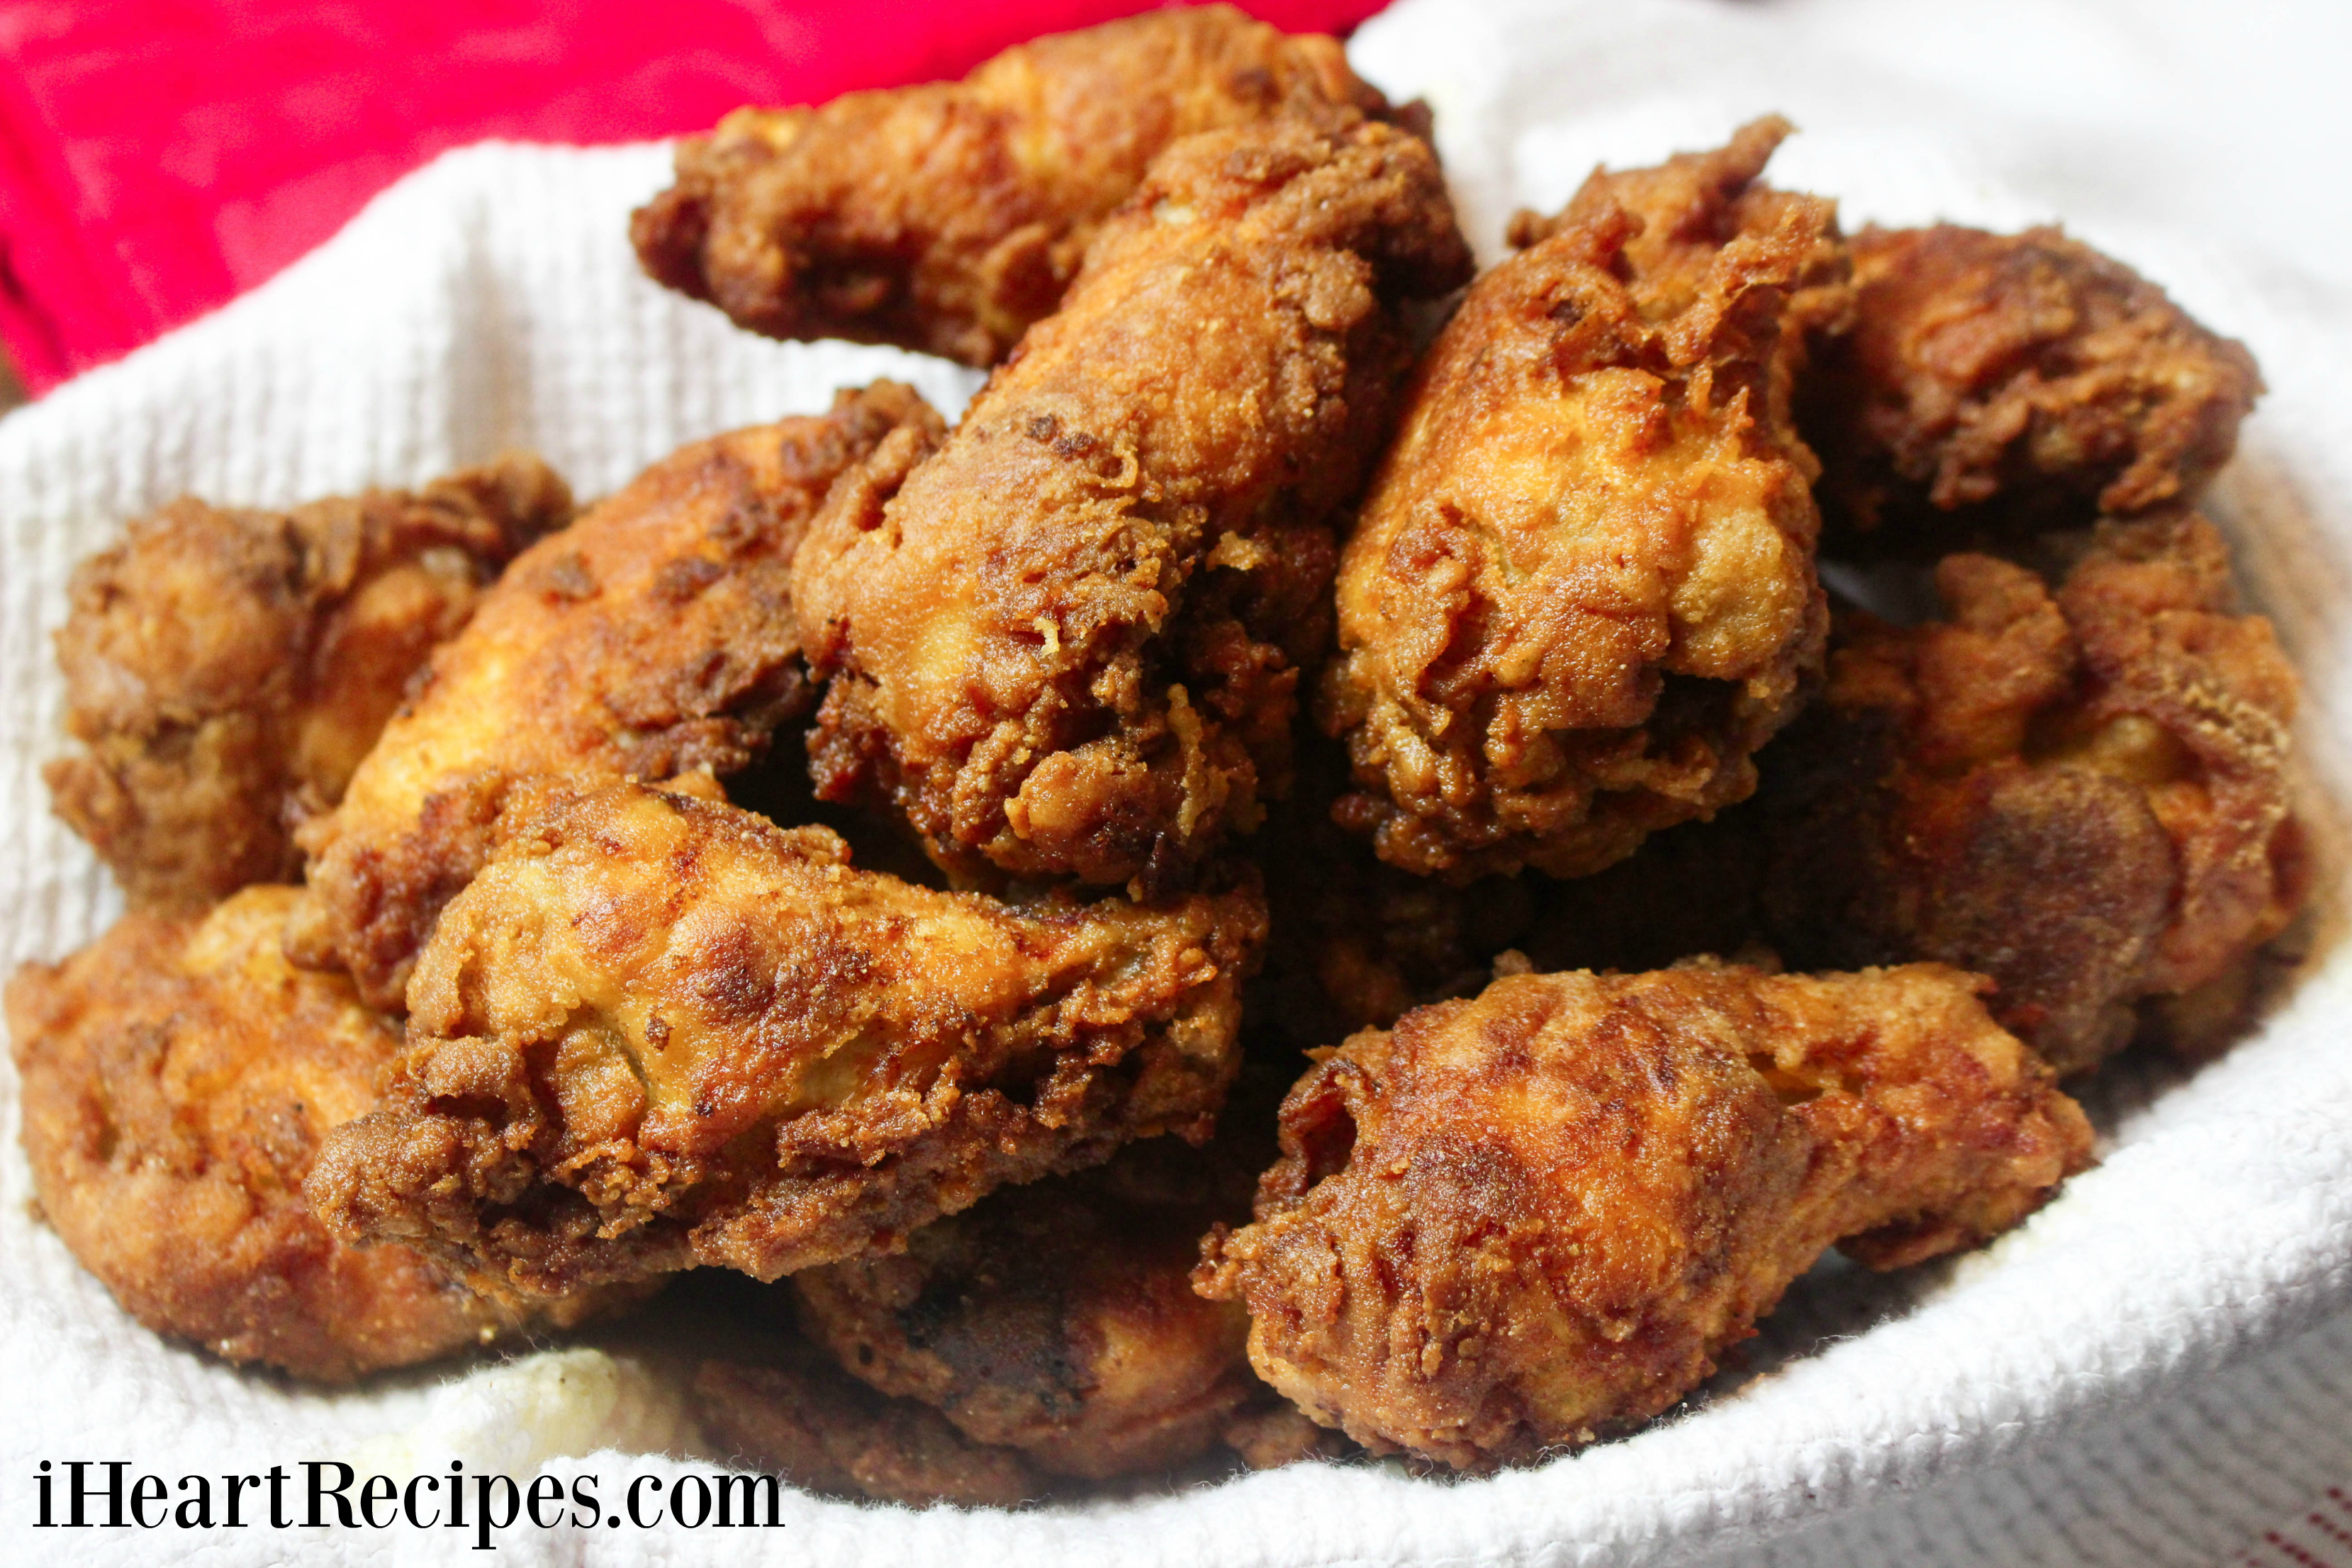 Waffle batter fried chicken is amazing and delicious